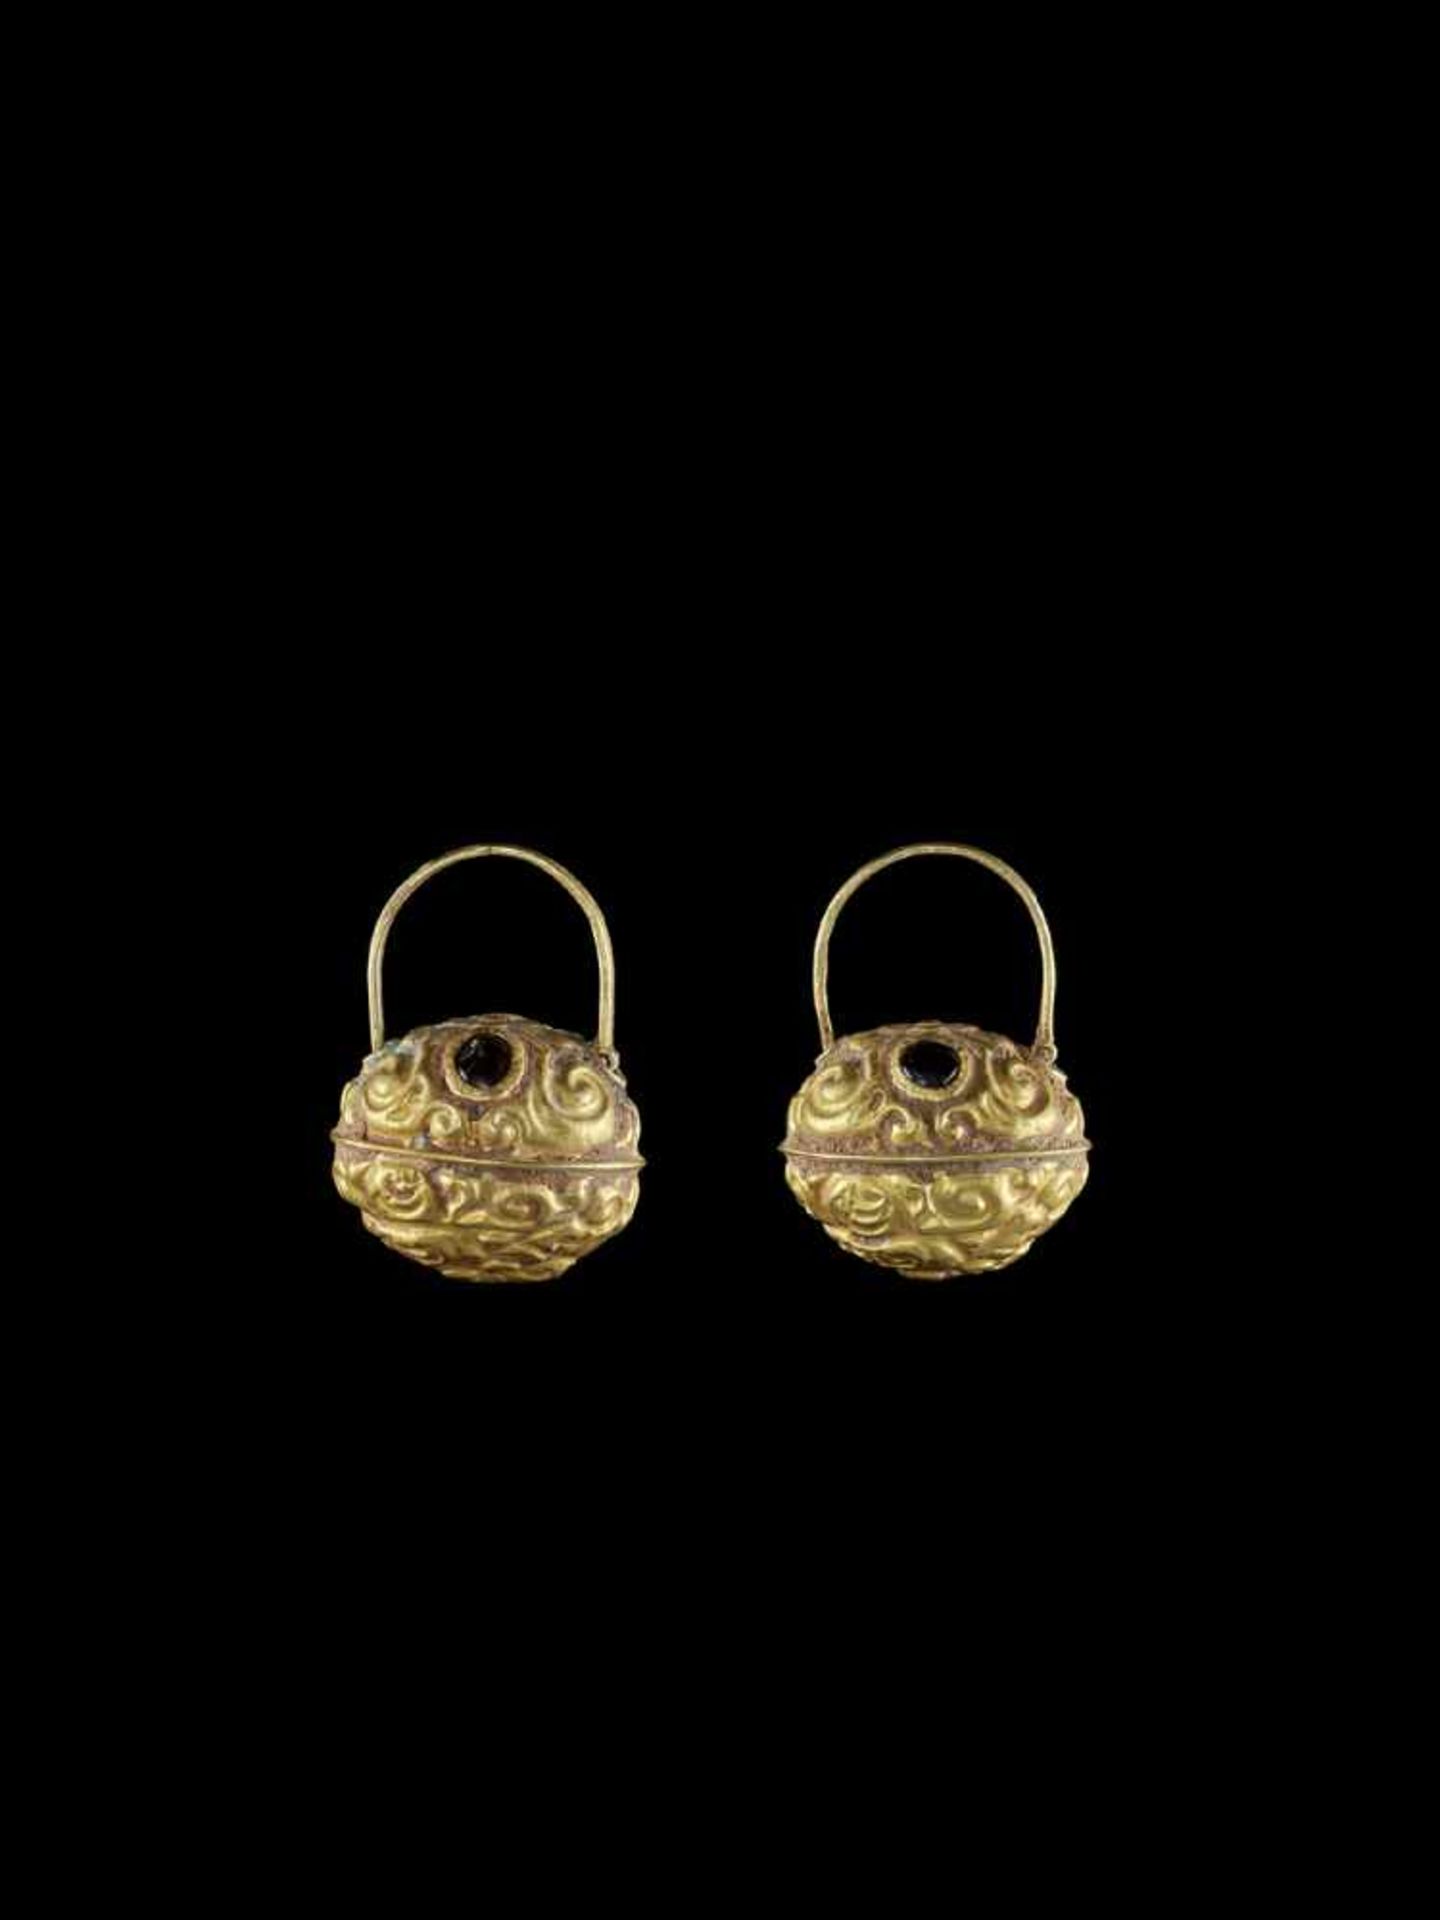 A PAIR OF BELL-SHAPED CHAM REPOUSSÉ GOLD EAR ORNAMENTS Champa, classical period, 10th – 12th